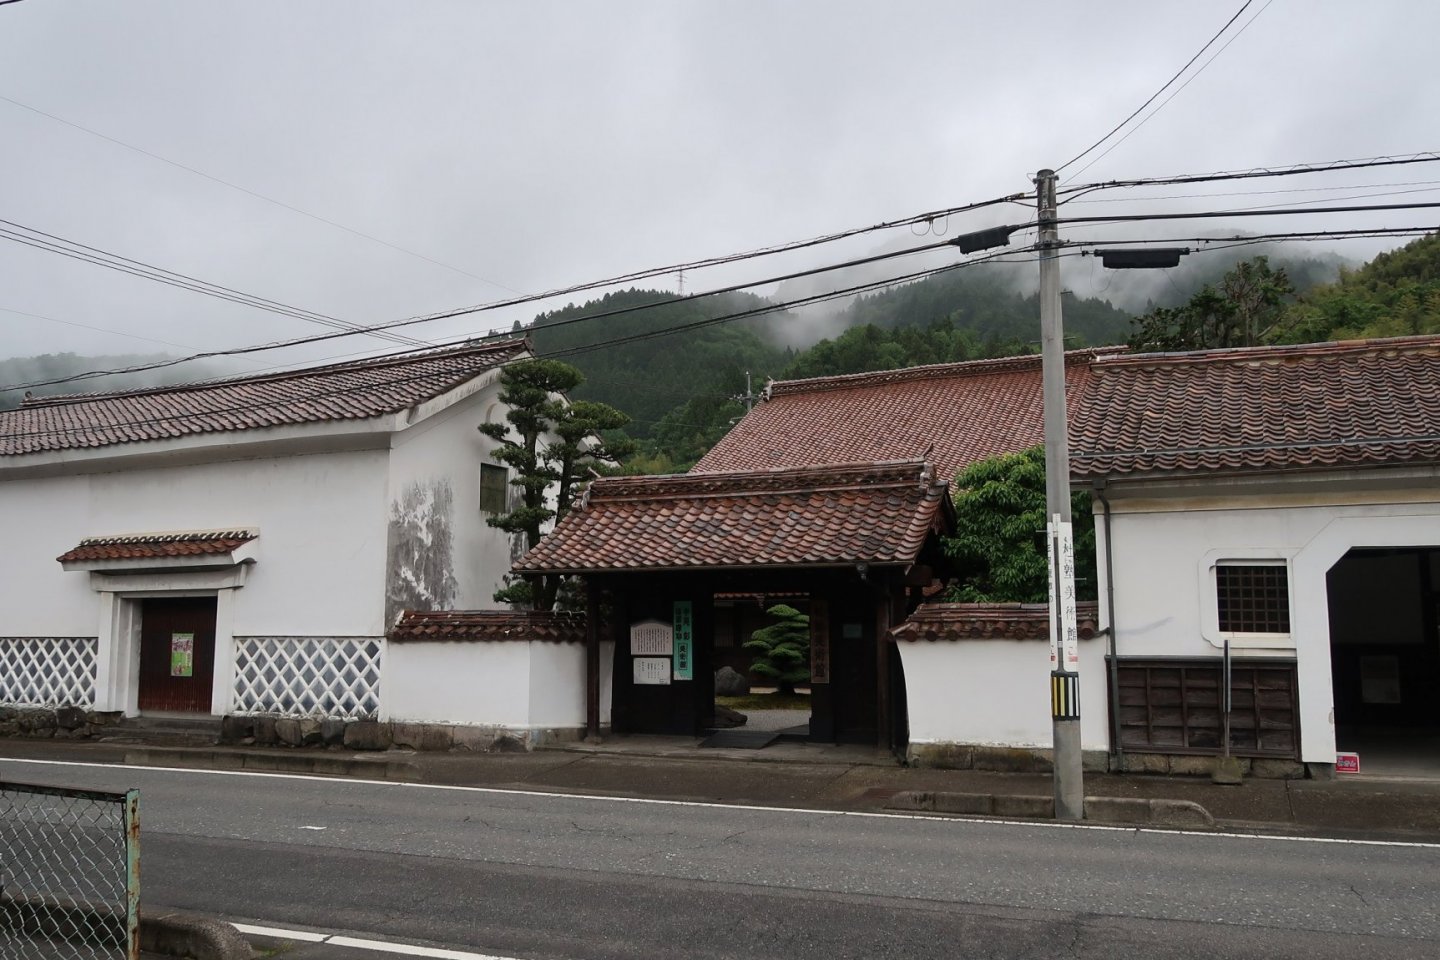 The front gate of the Morijuku Art Gallery with some rice granaries on either side of the gate